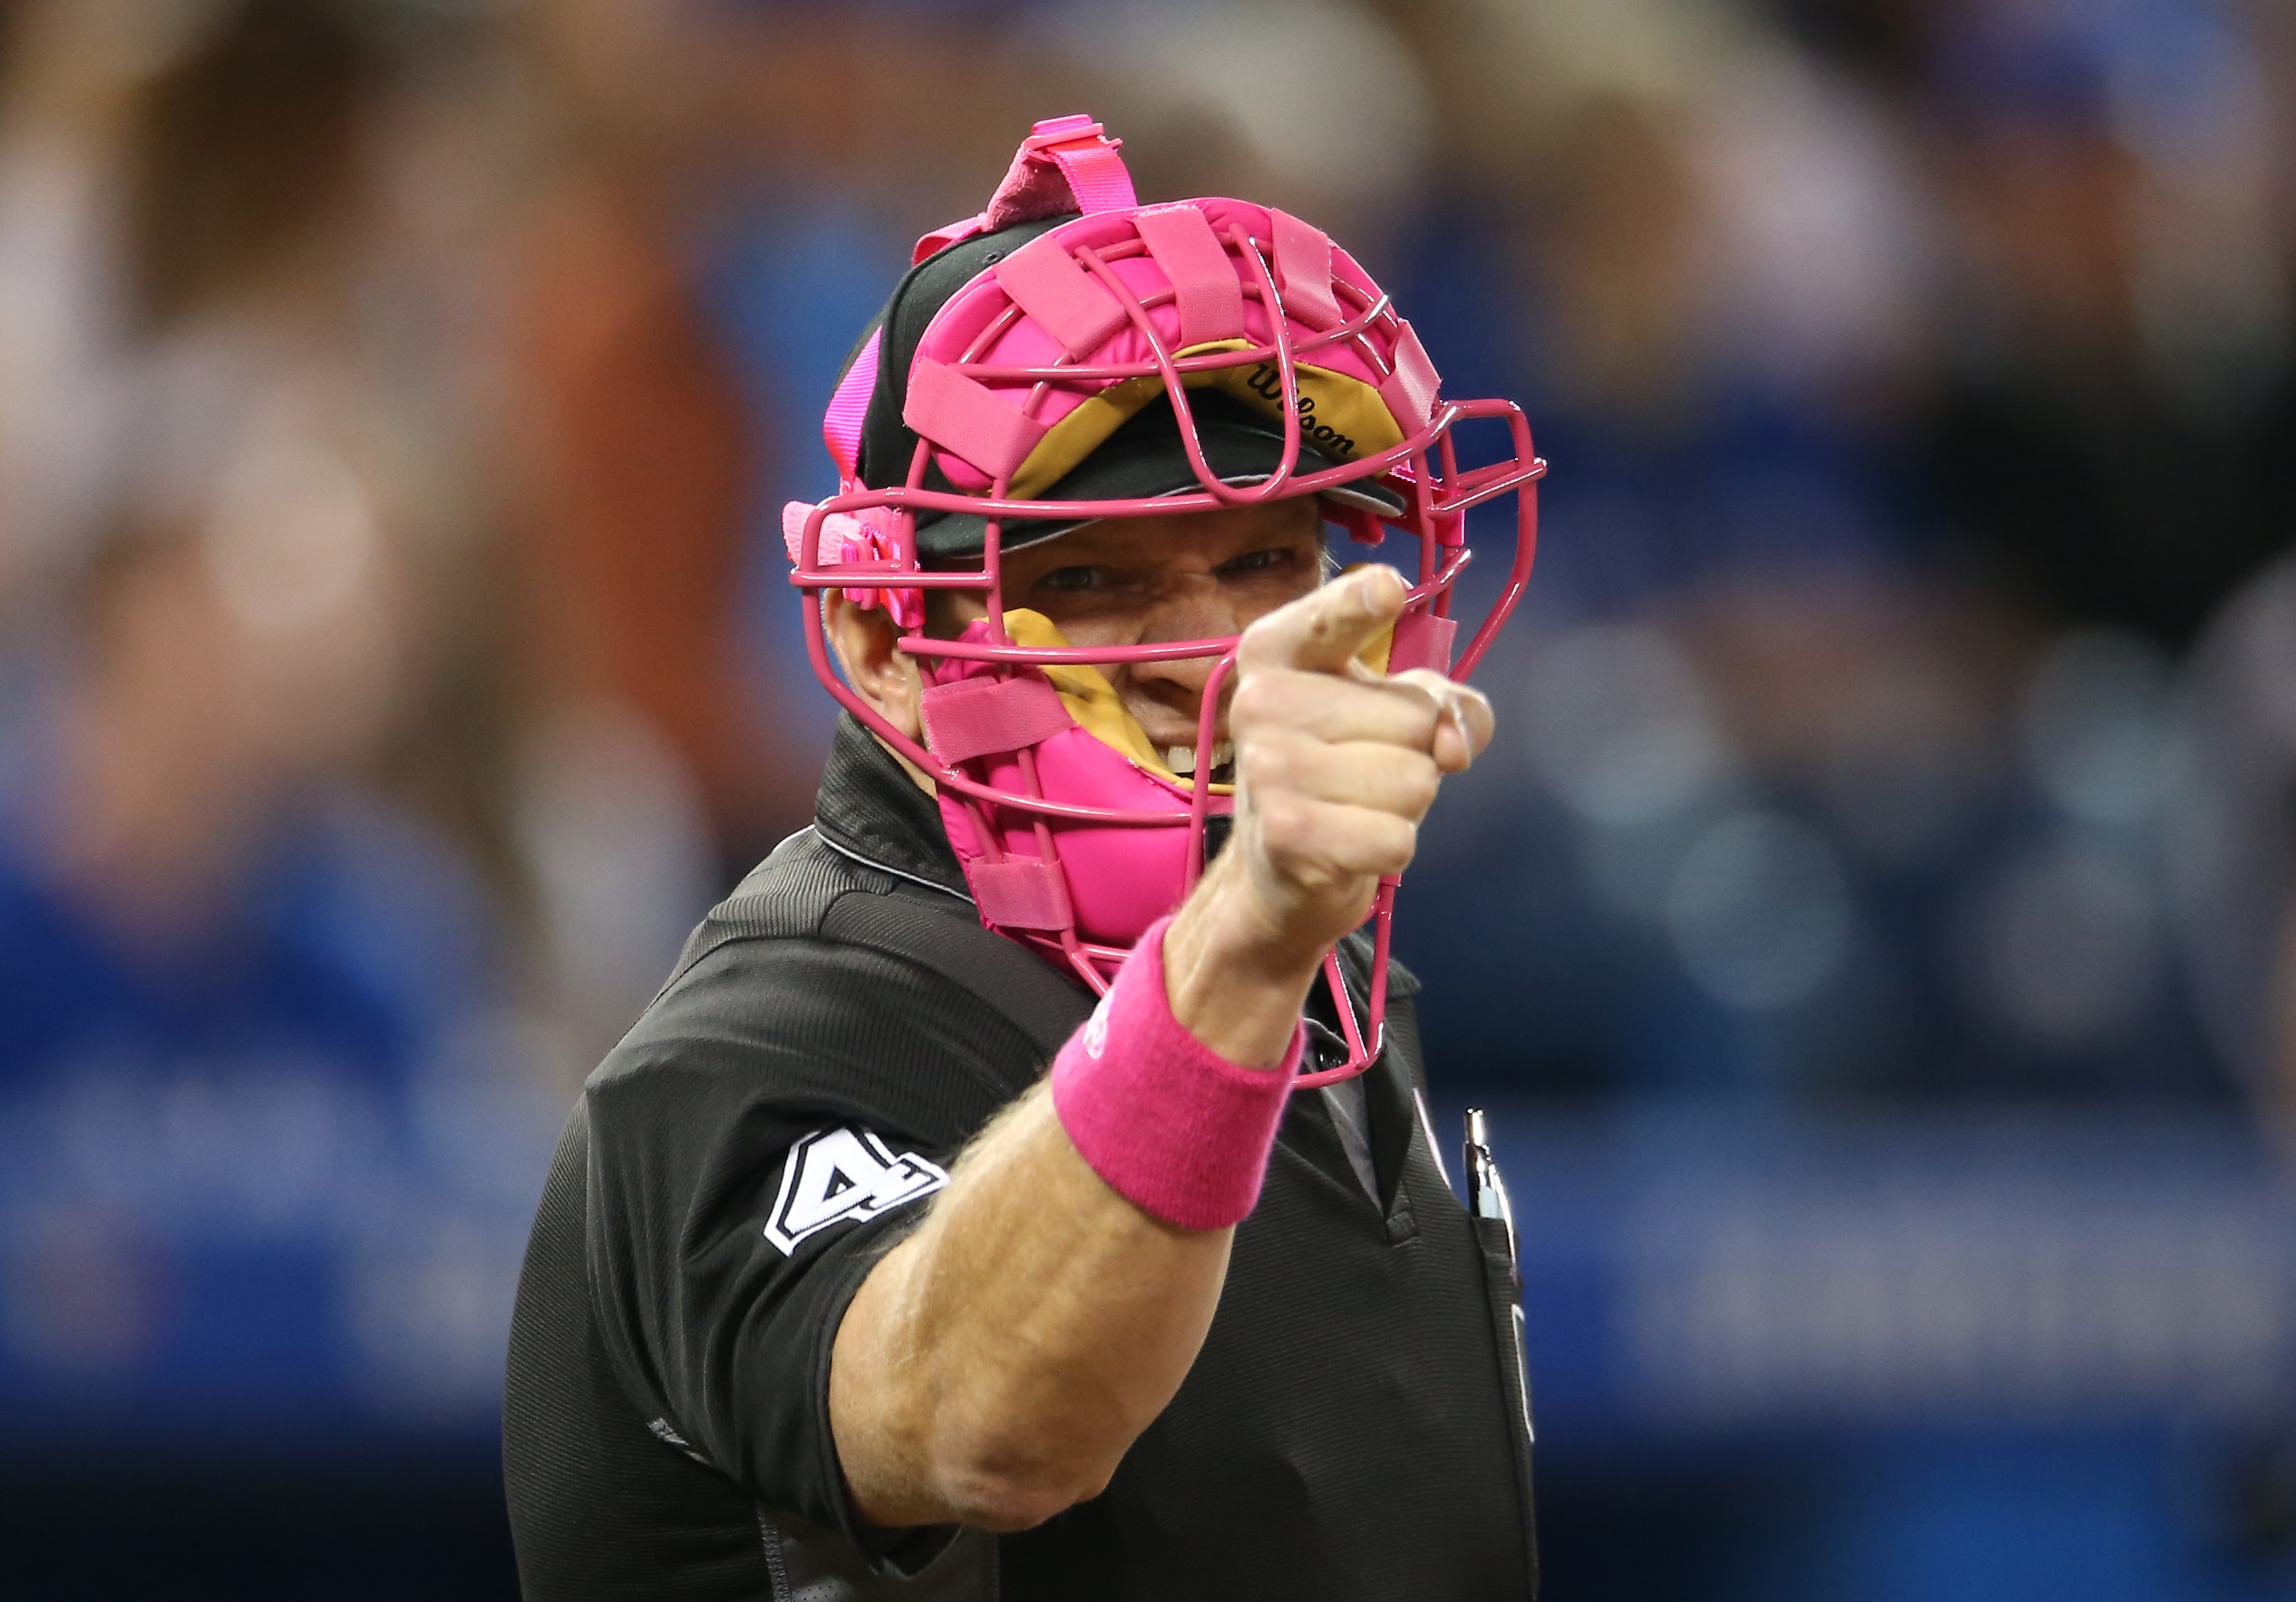 TORONTO, CANADA - MAY 8: Home plate umpire Chad Fairchild #4 calls a strike while wearing a pink mask on Mother's Day during the Toronto Blue Jays MLB game against the Los Angeles Dodgers on May 8, 2016 at Rogers Centre in Toronto, Ontario, Canada. (Photo by Tom Szczerbowski/Getty Images)